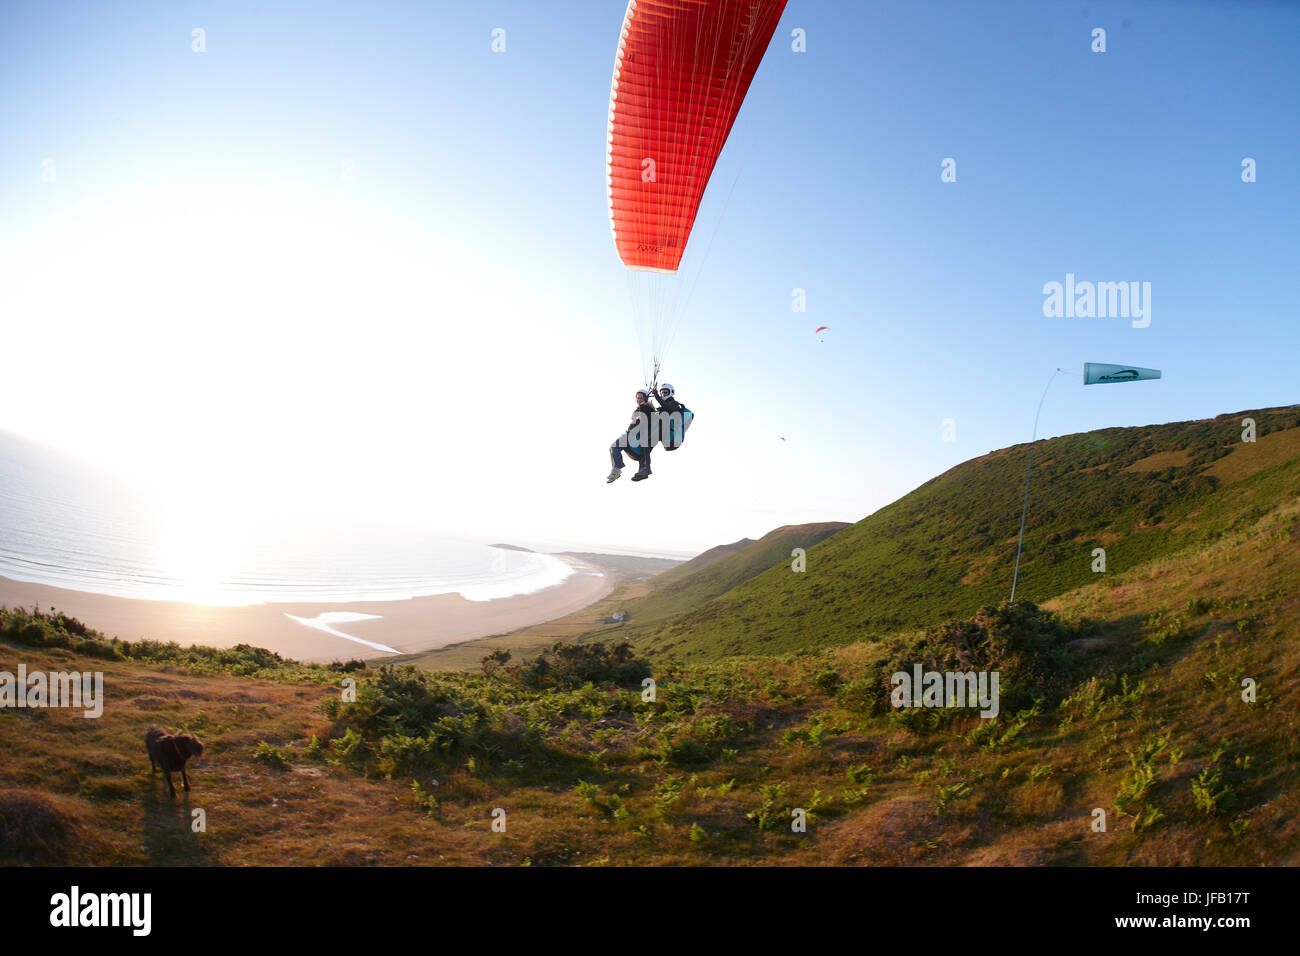 Tandem paragliding over the ocean Stock Photo